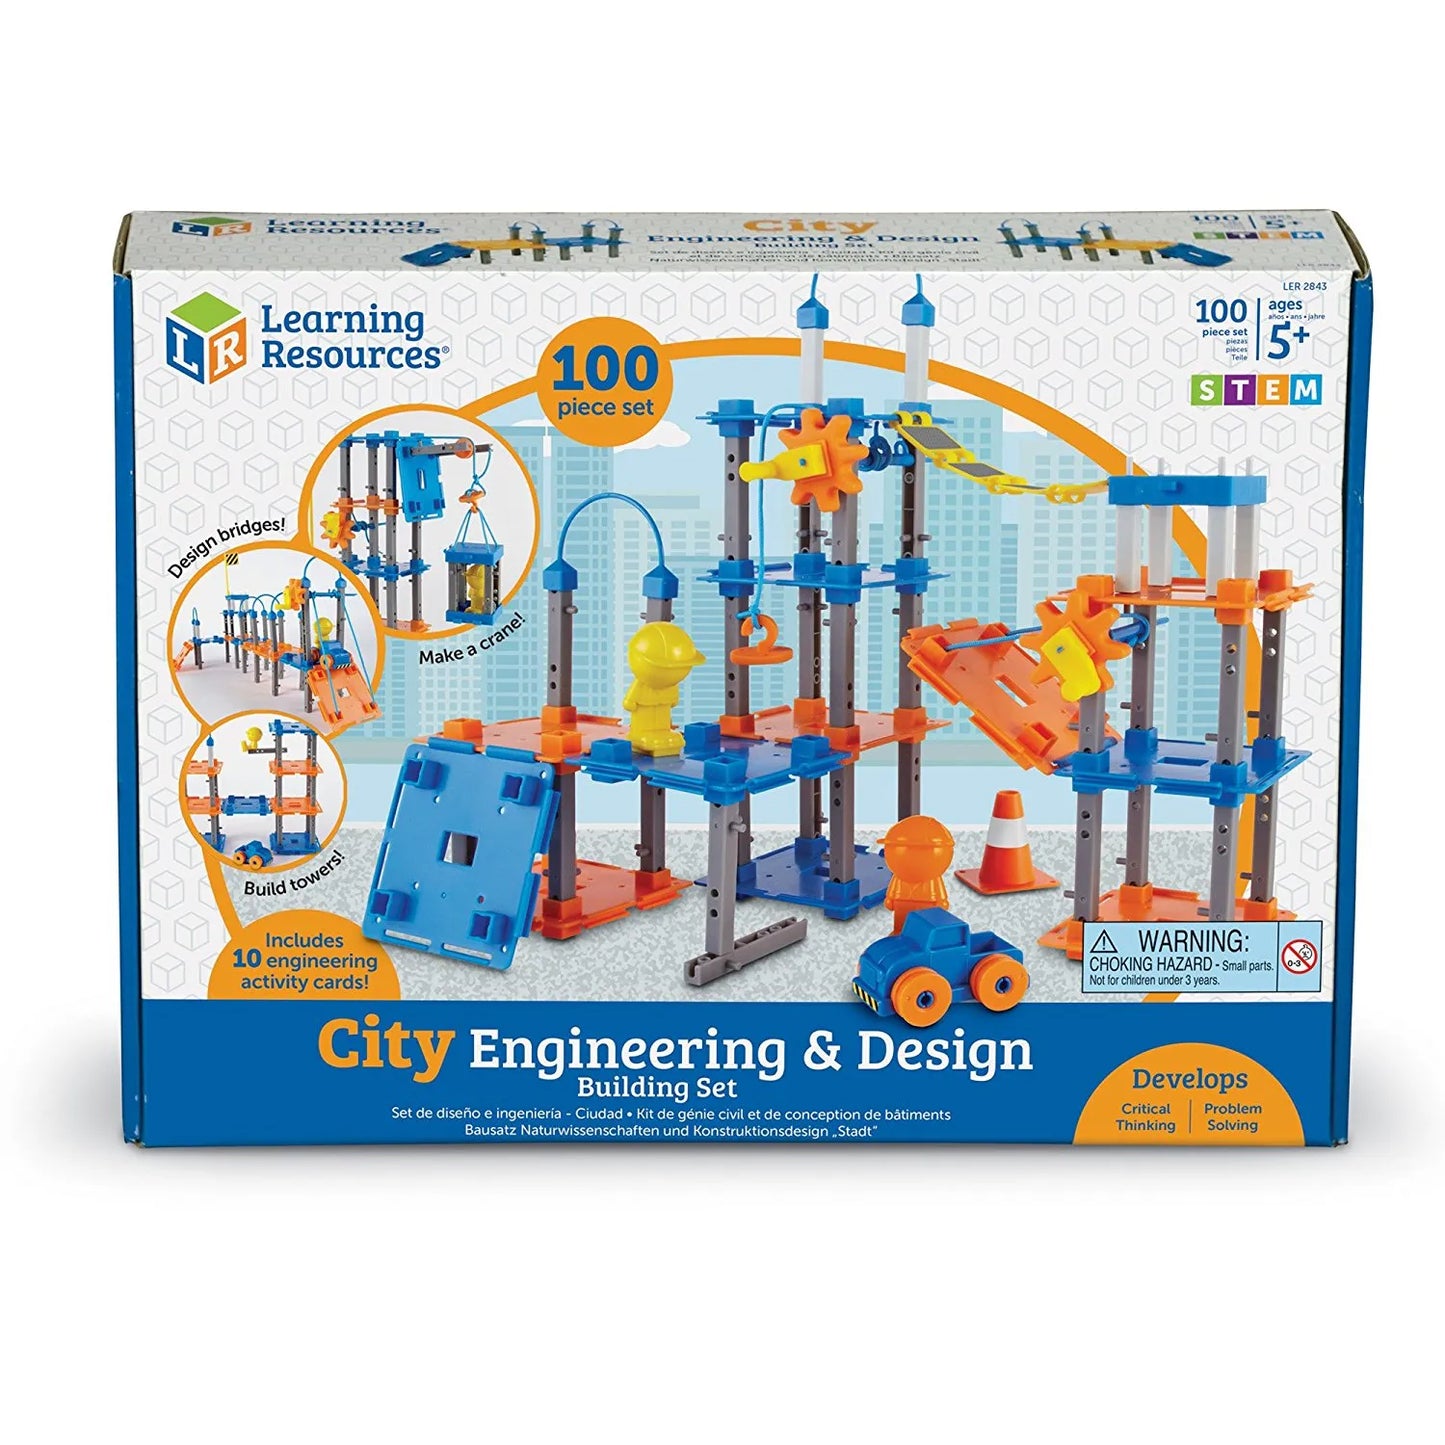 Learning Resources City Engineering & Design Building Set